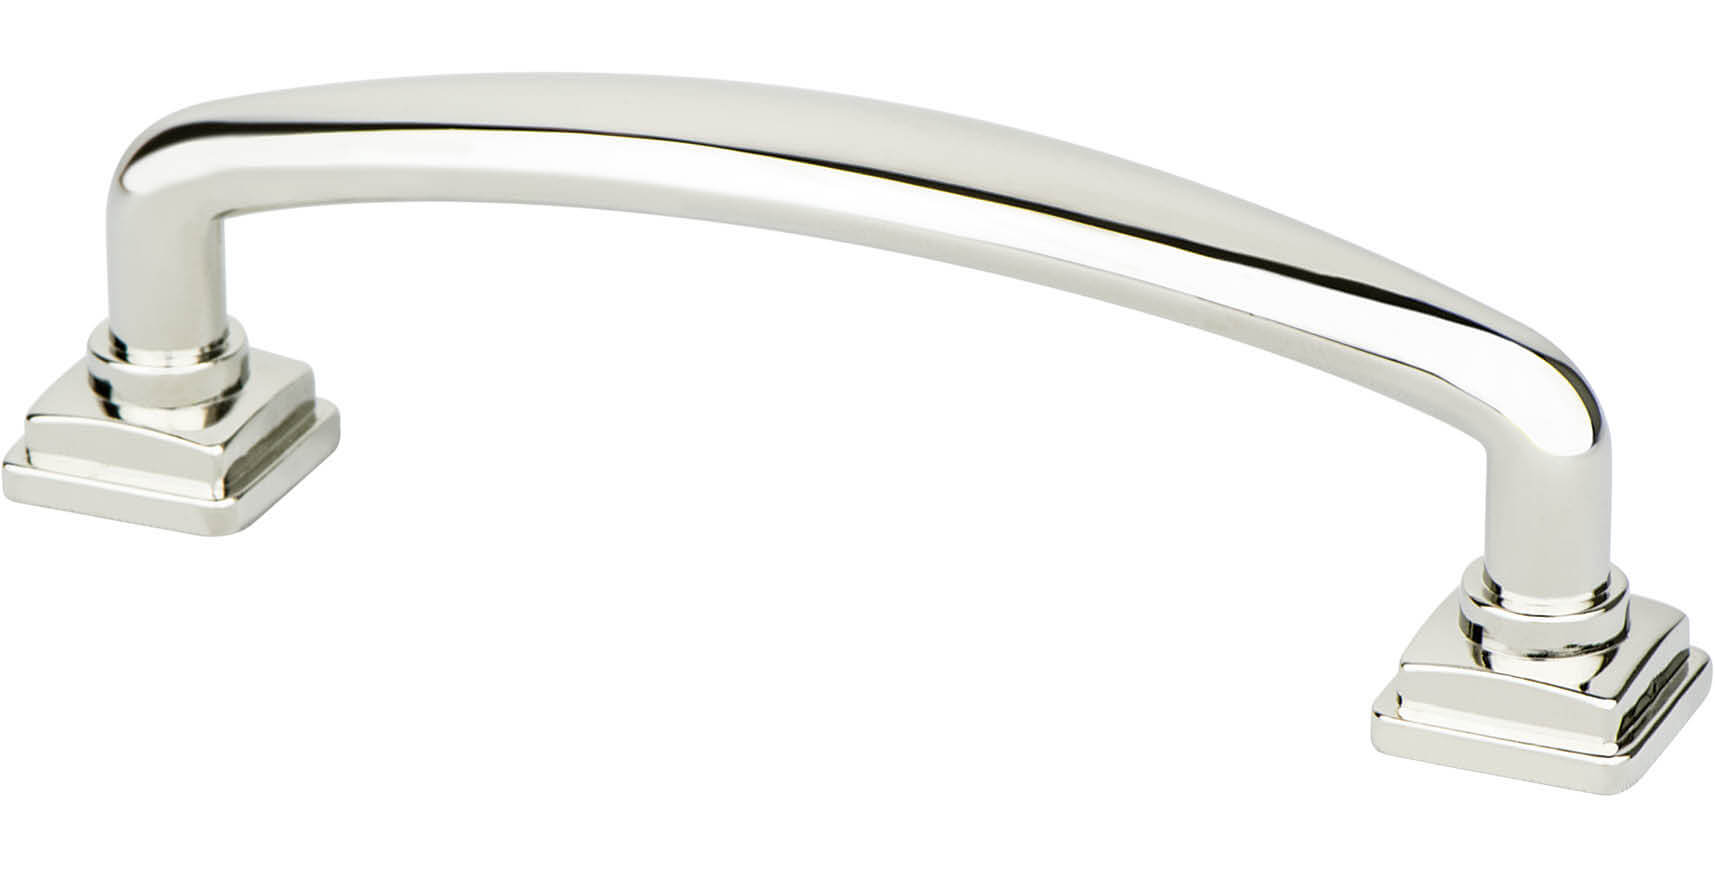 Tailored Traditional 96mm CC Polished Nickel Pull